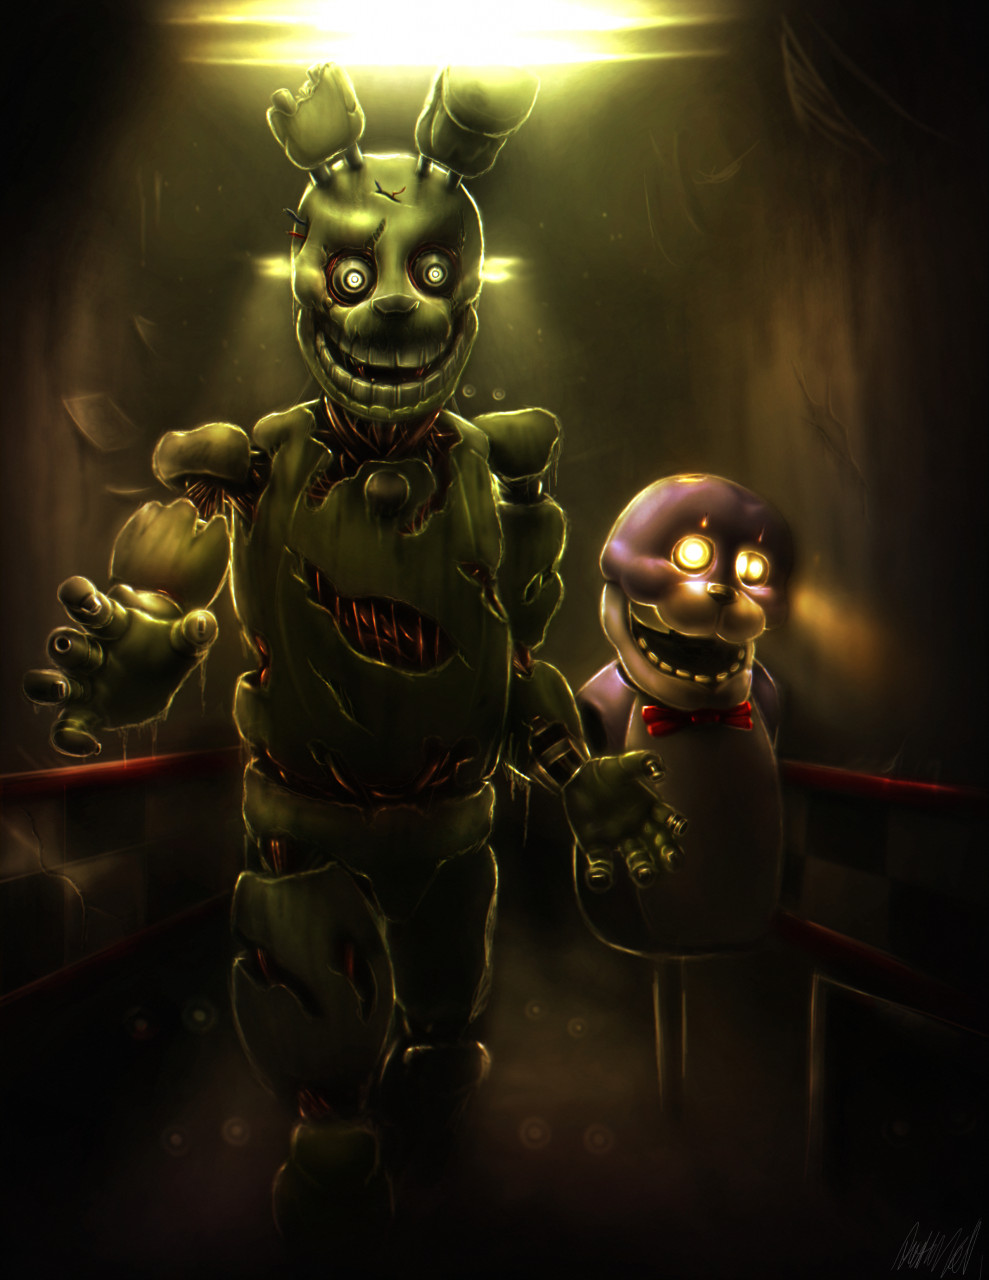 Five Nights At Freddy's 3 by thewebsurfer97 -- Fur Affinity [dot] net